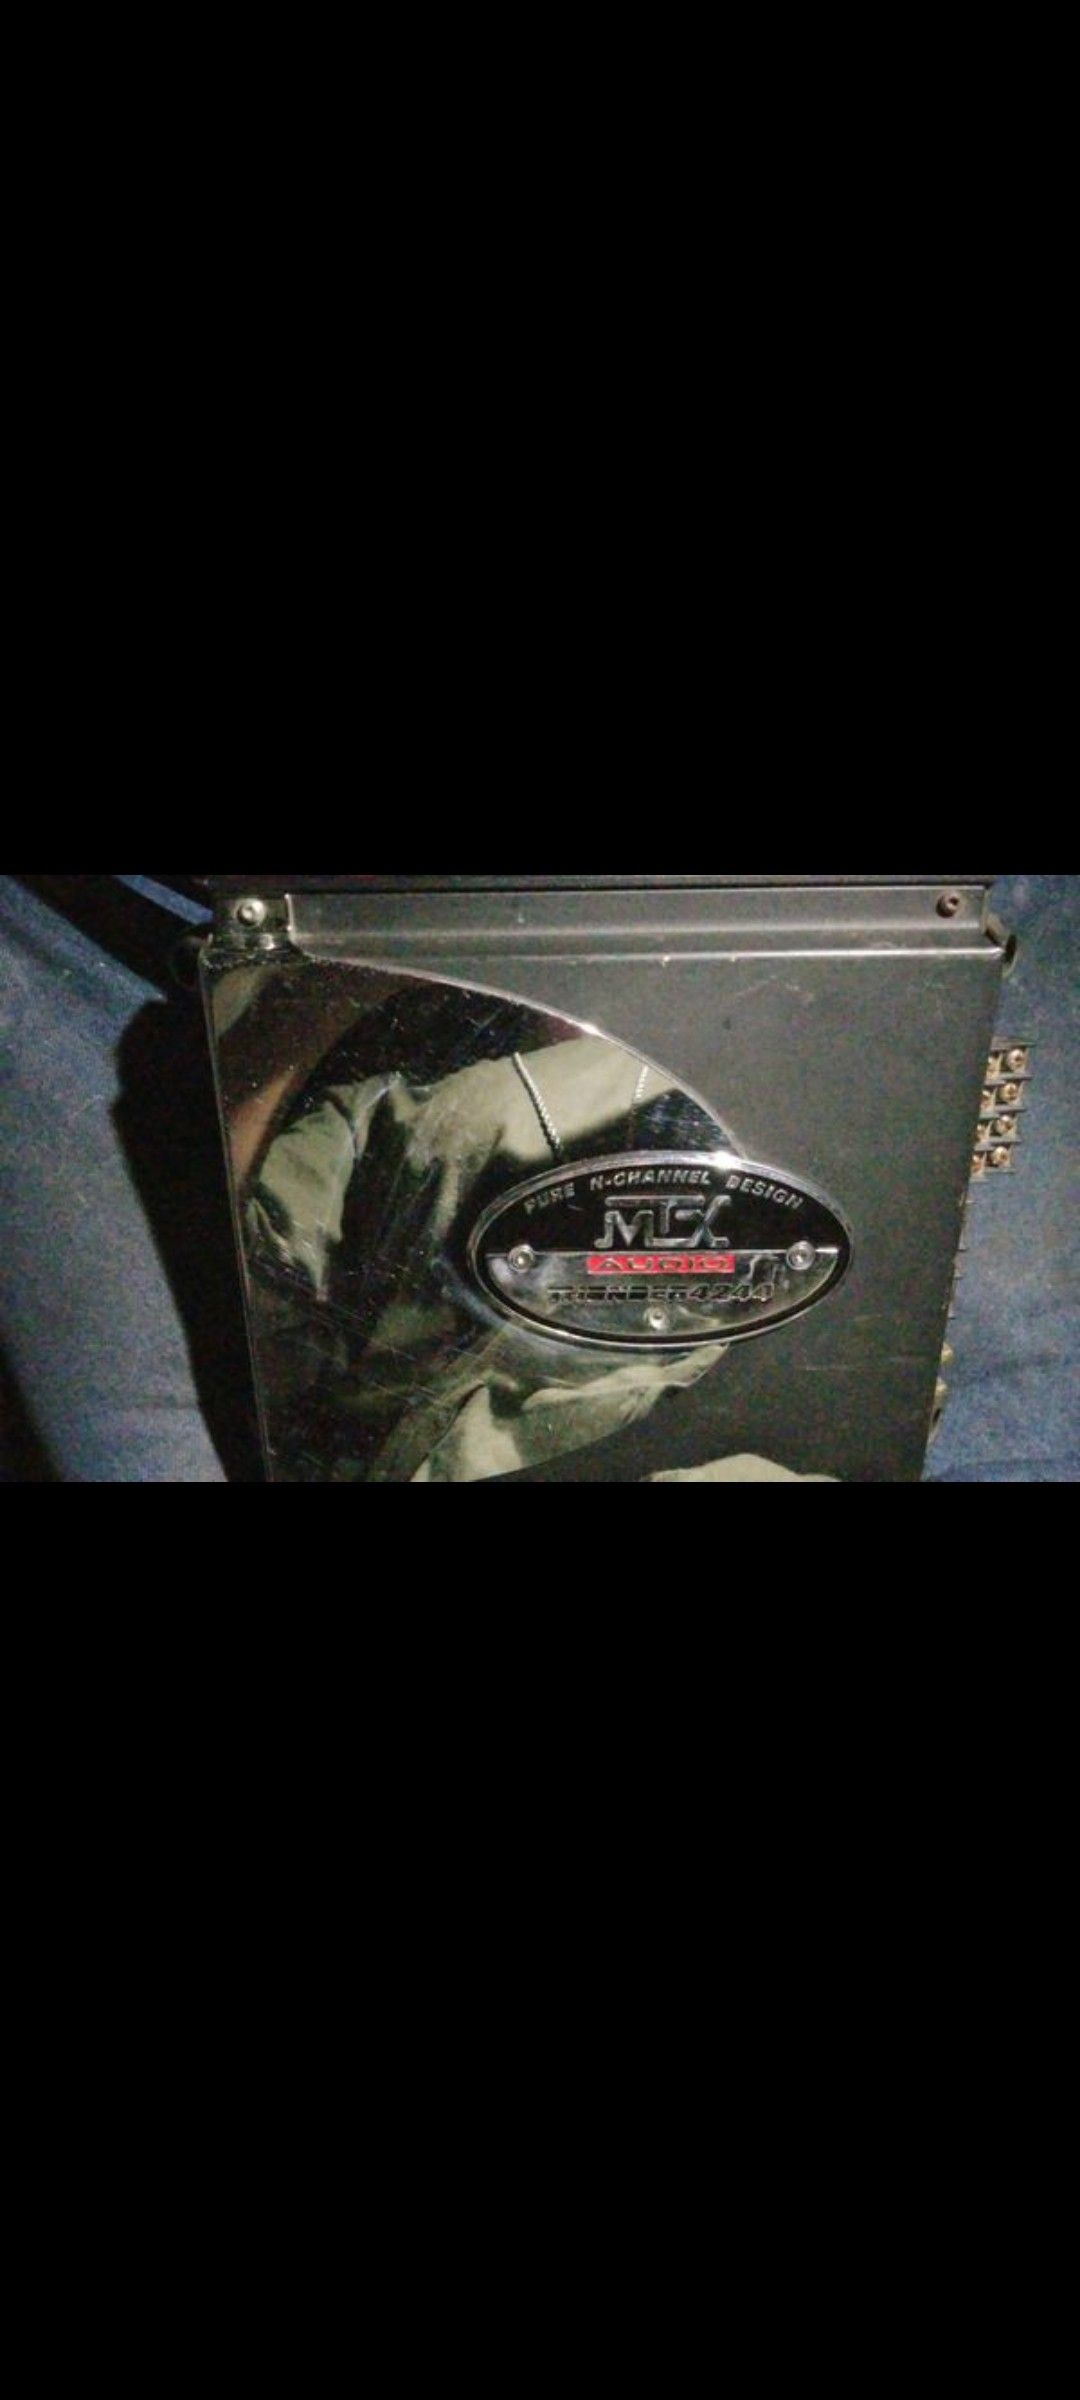 MTX thunder4244 amplifier ...its a 2 or 4 channel..